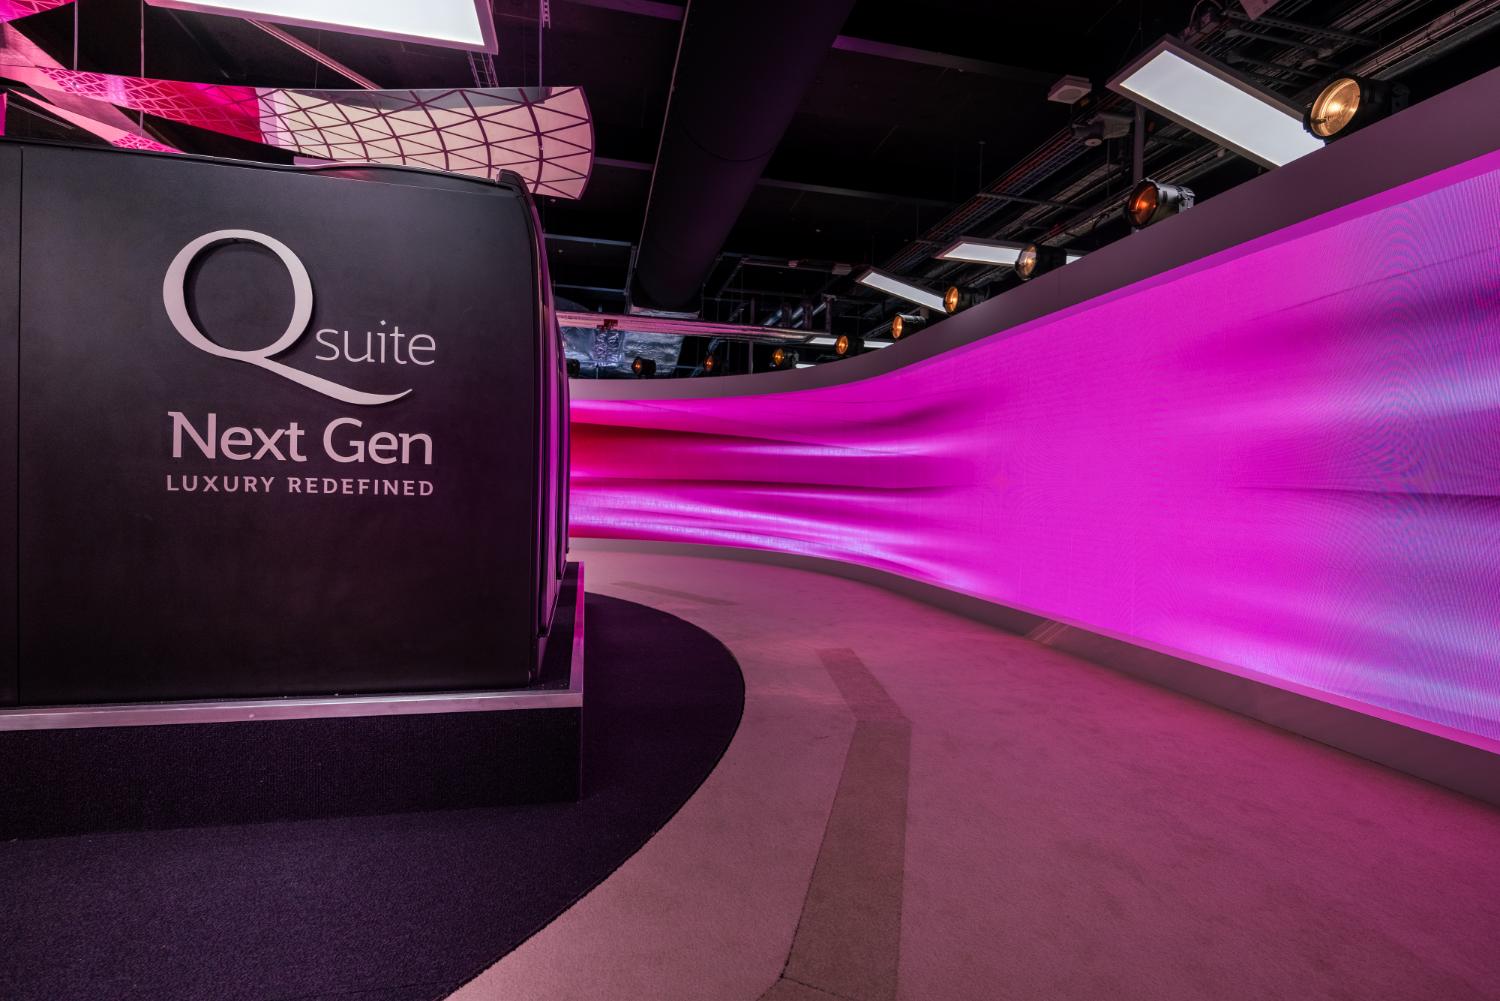 NEWS: New Qatar QSuite next gen unveiled, is it significantly better than the original?